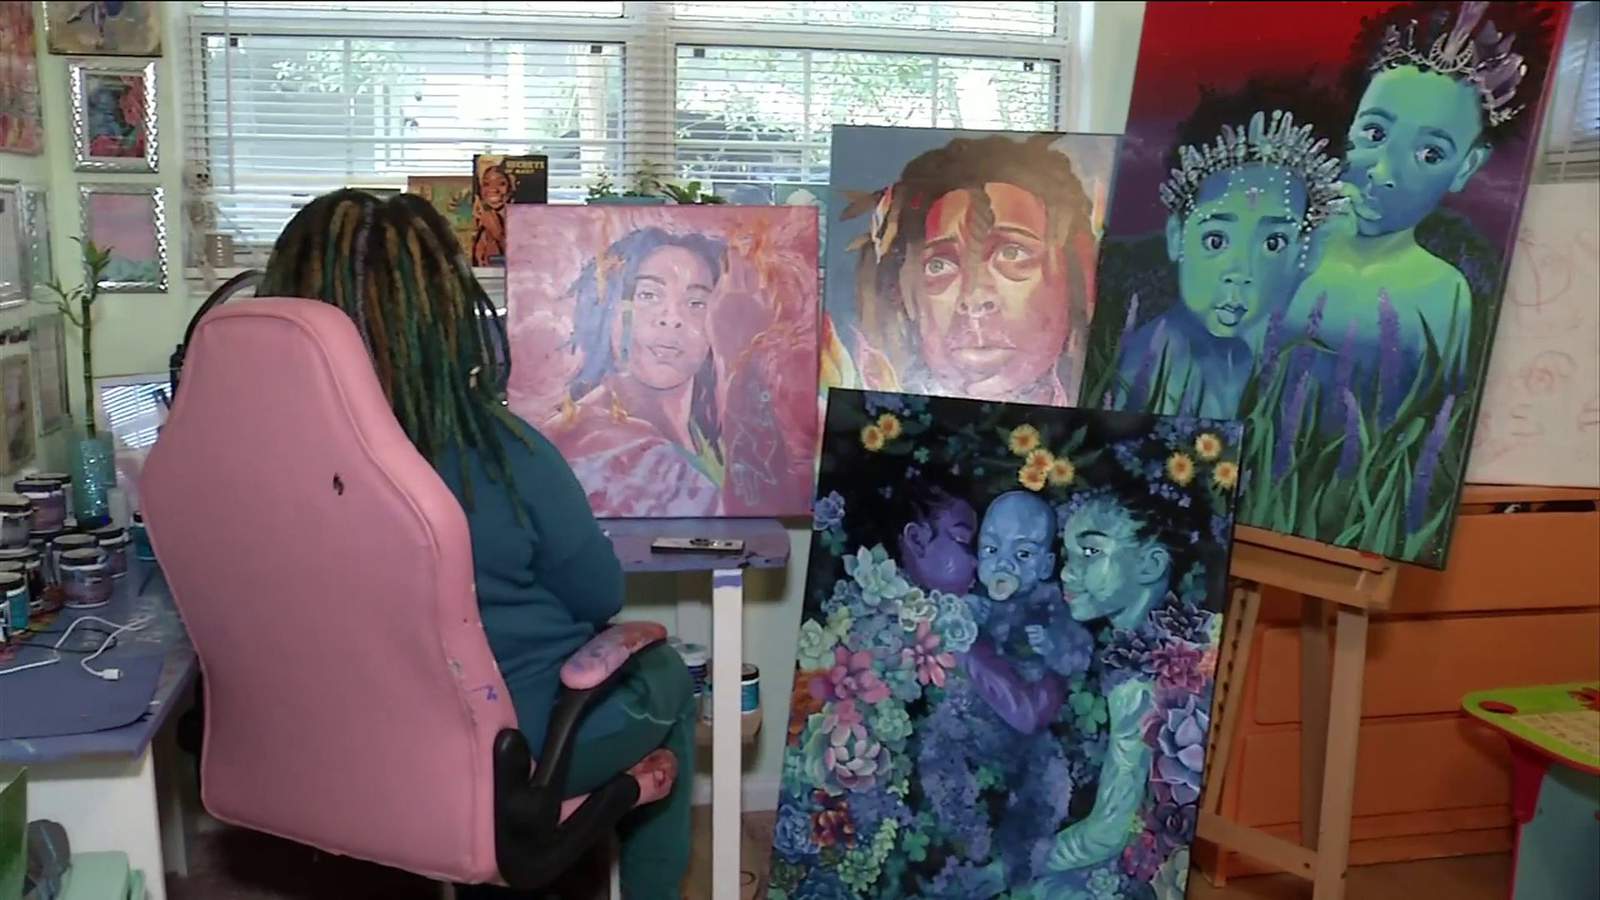 Local artist paints her path through self-expression